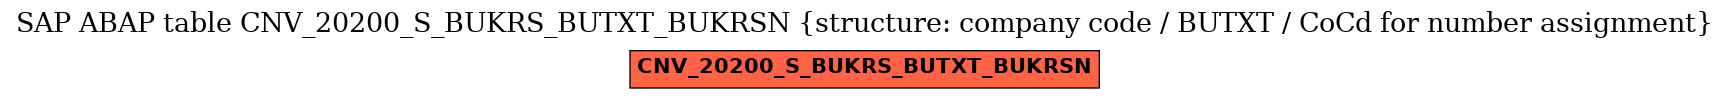 E-R Diagram for table CNV_20200_S_BUKRS_BUTXT_BUKRSN (structure: company code / BUTXT / CoCd for number assignment)